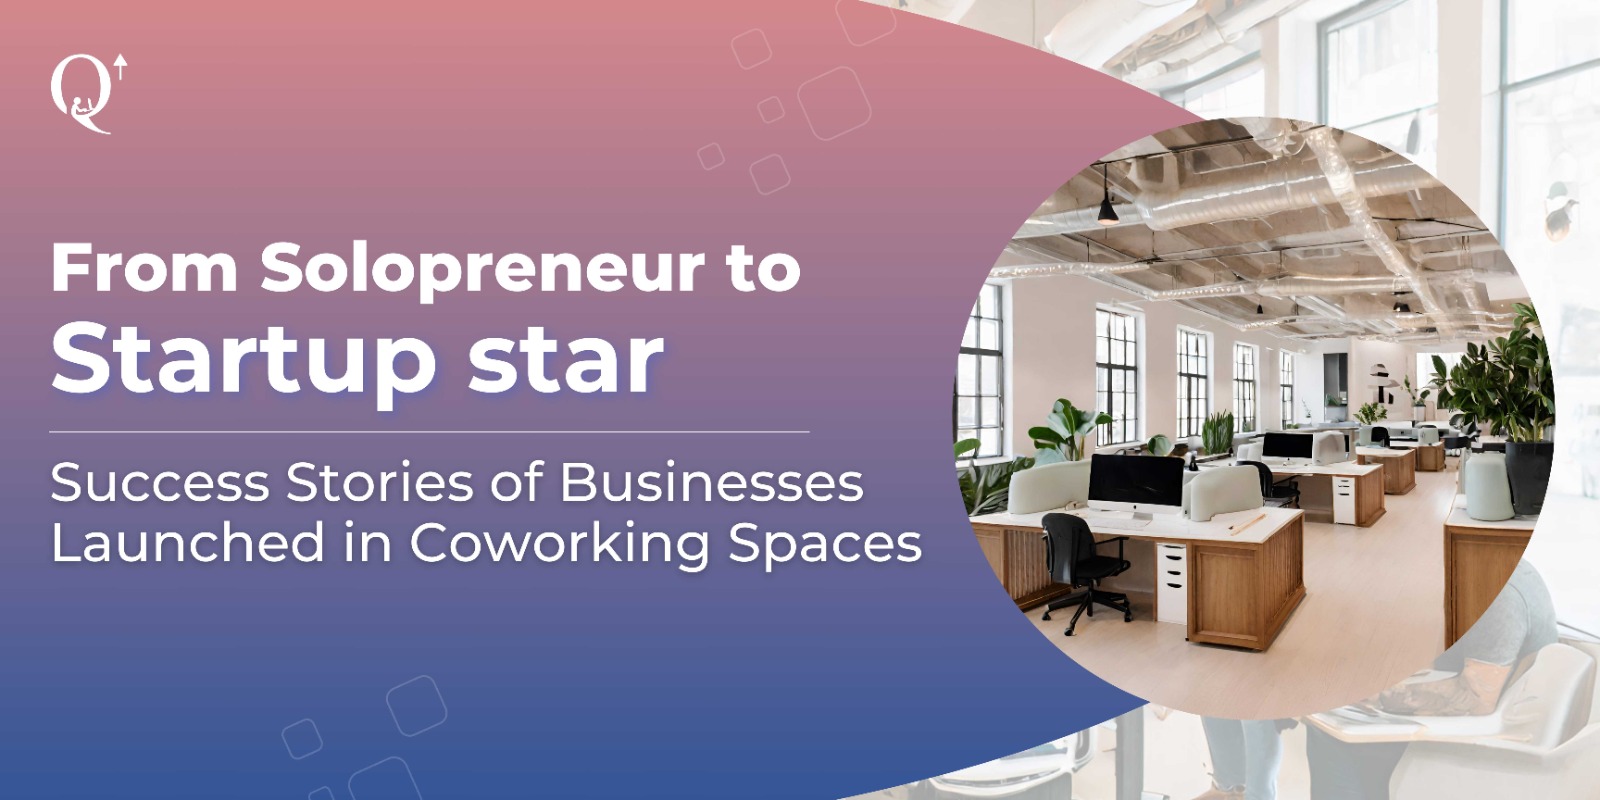 coworking Success Stories